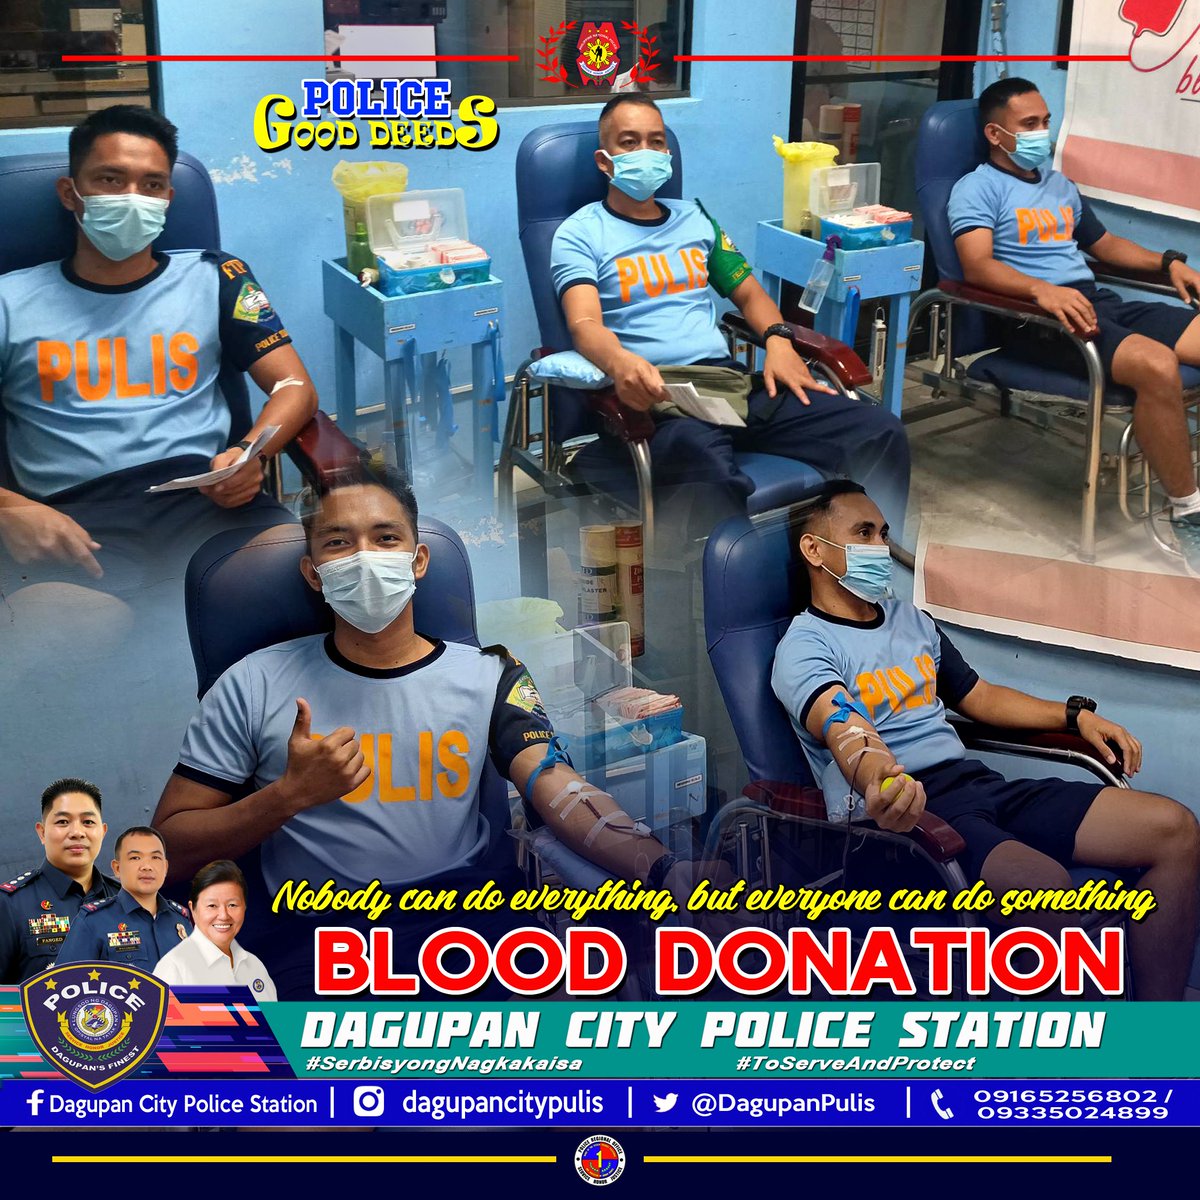 Police Trainees (CL-SAKTIBAY), led by their duty FTOs of Dagupan City Police Station under the supervision of PLTCOL BRENDON B PALISOC, OIC, donated blood by request of Mr. Marman Lalata at Region 1 Medical Center, Arellano St., Pantal, Dagupan City. #SerbisyongNagkakaisa